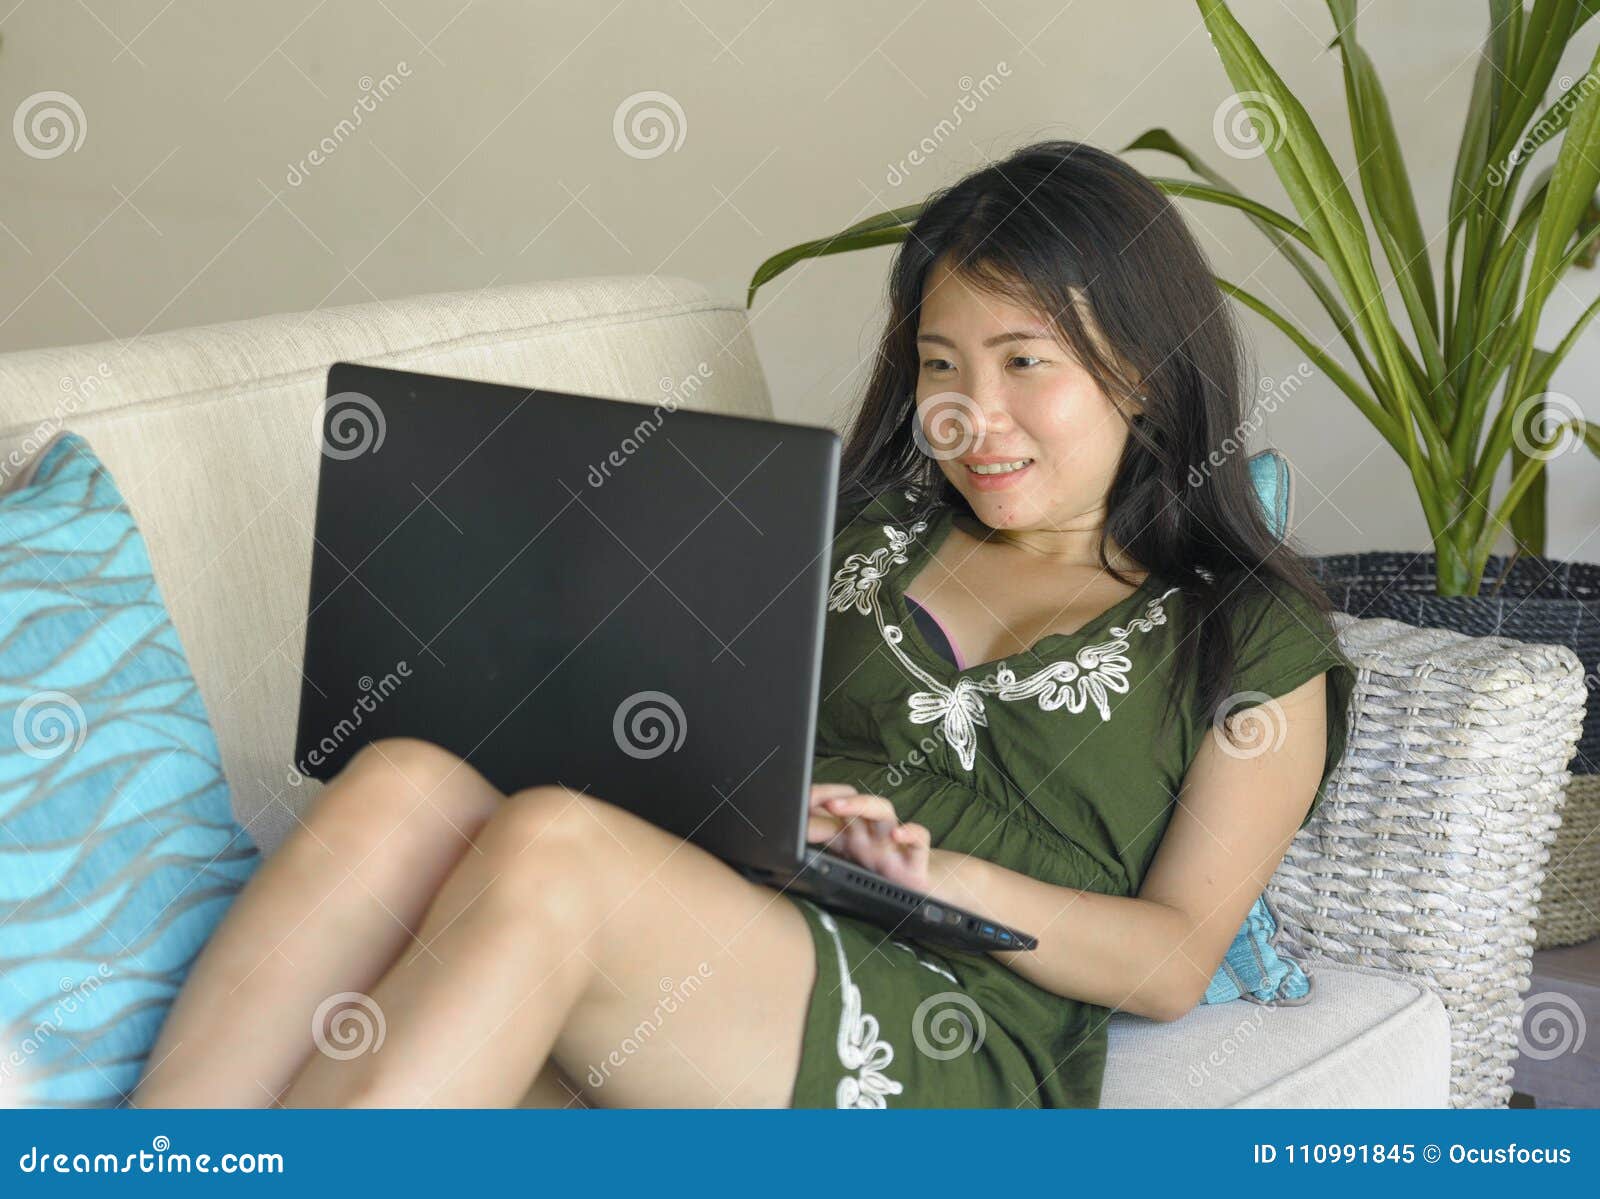 young-beautiful-relaxed-asian-chinese-woman-her-s-s-lying-happy-living-room-home-sofa-couch-working-using-computer-110991845.jpg